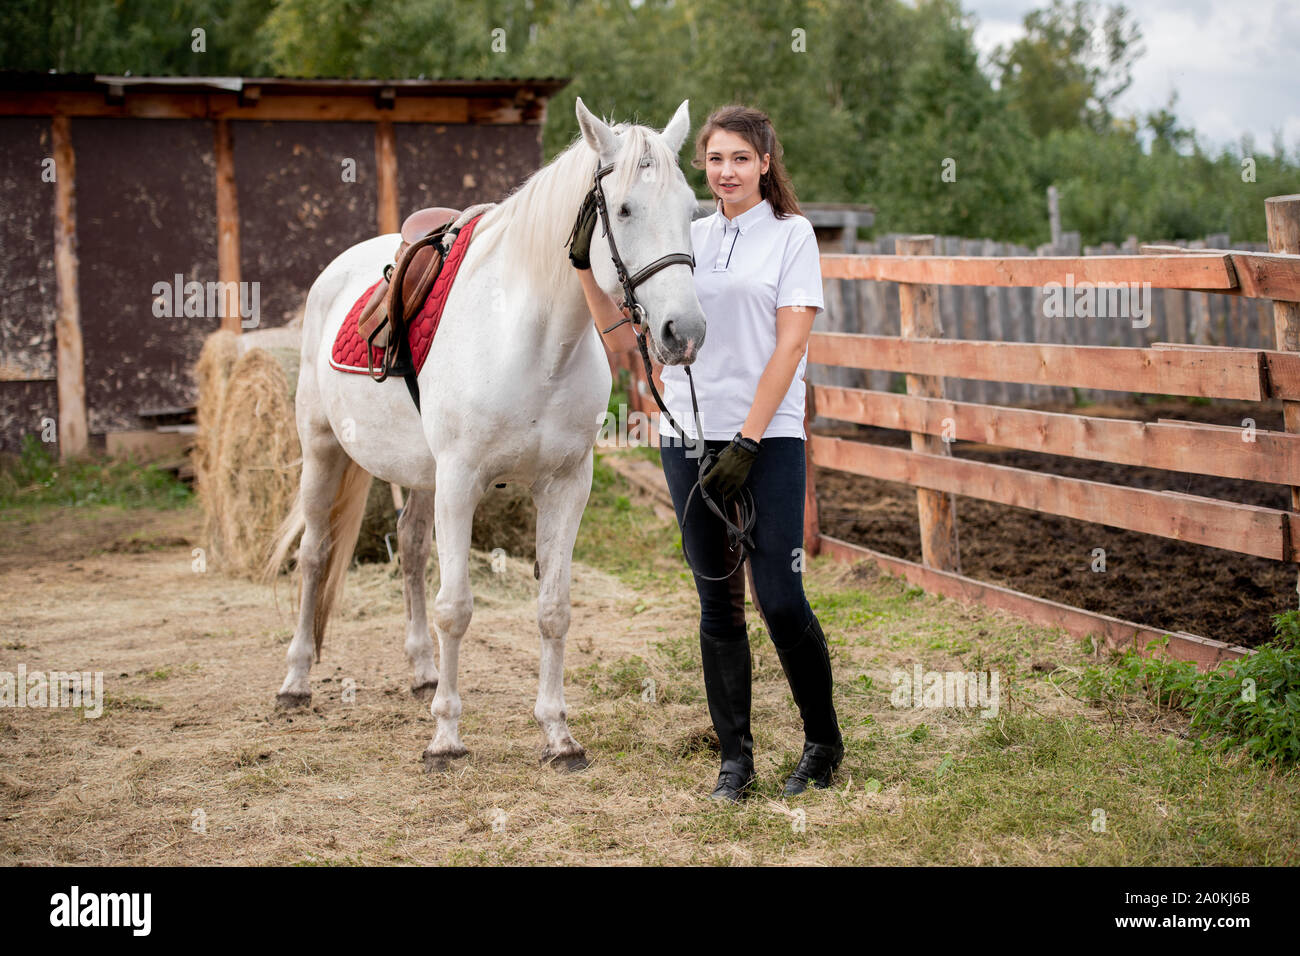 Young active woman chilling out with white purebred racehorse Stock Photo